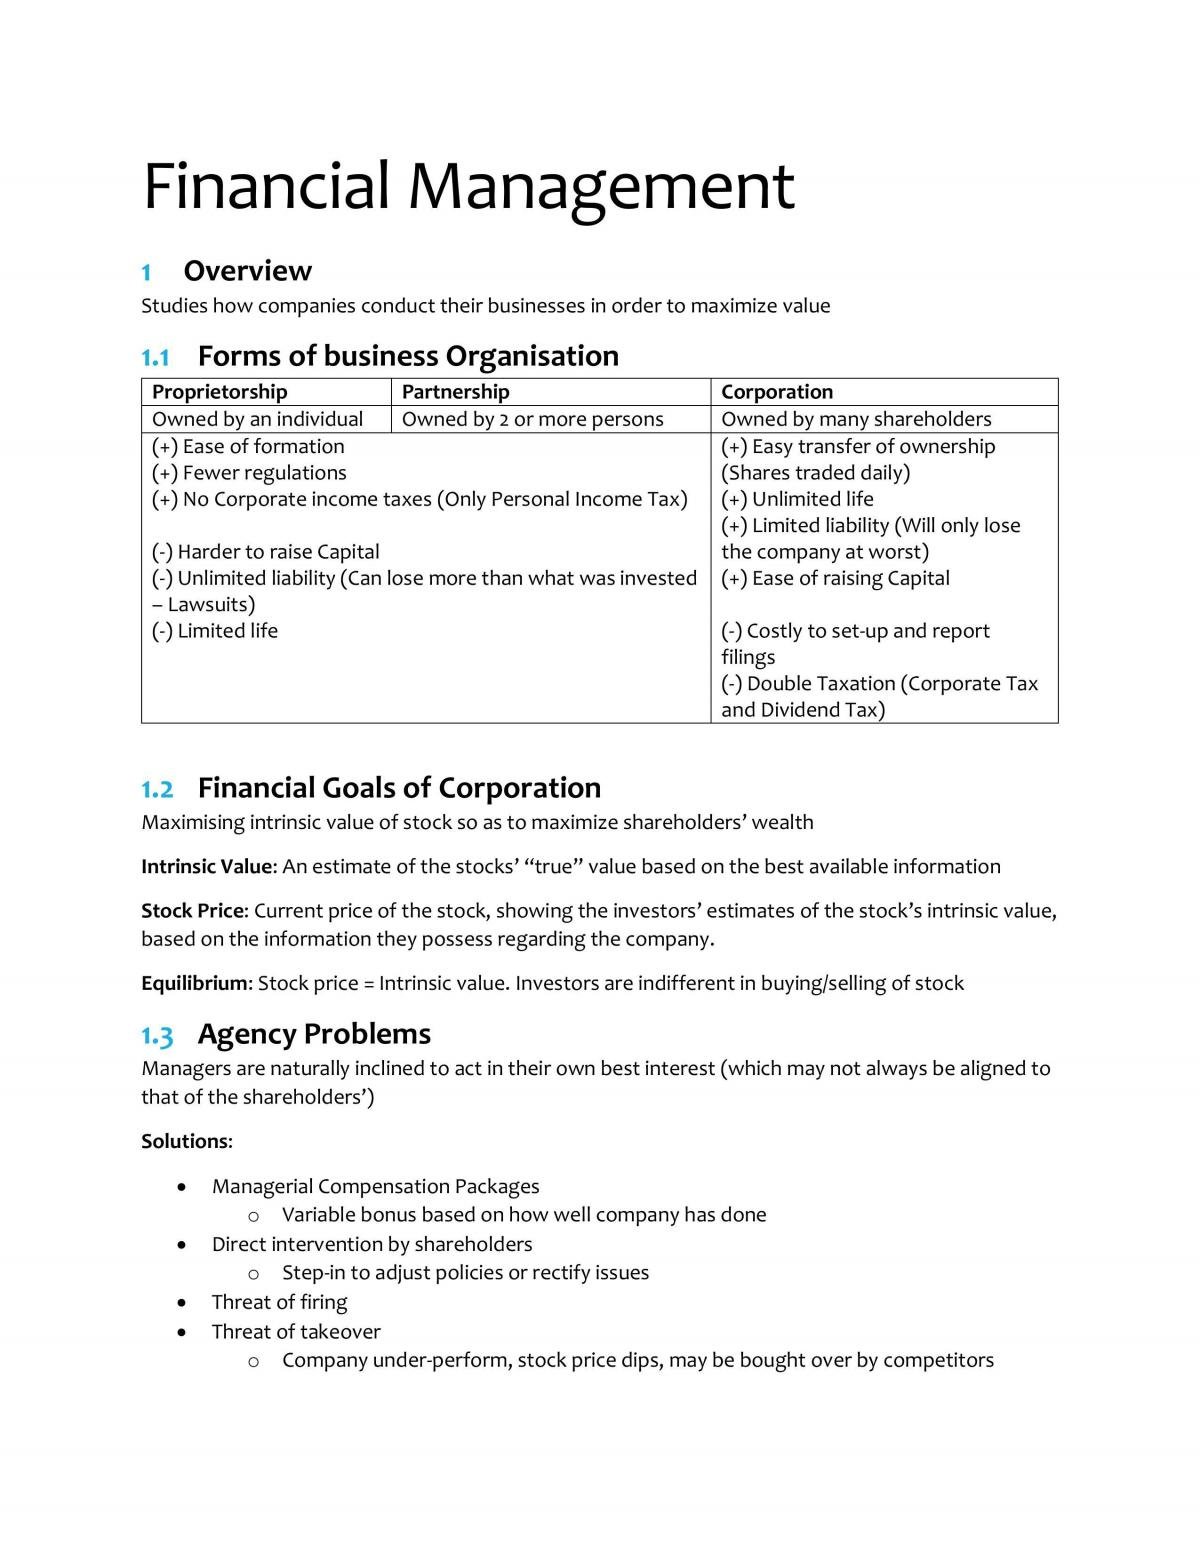 Financial management notes ntu - Page 1